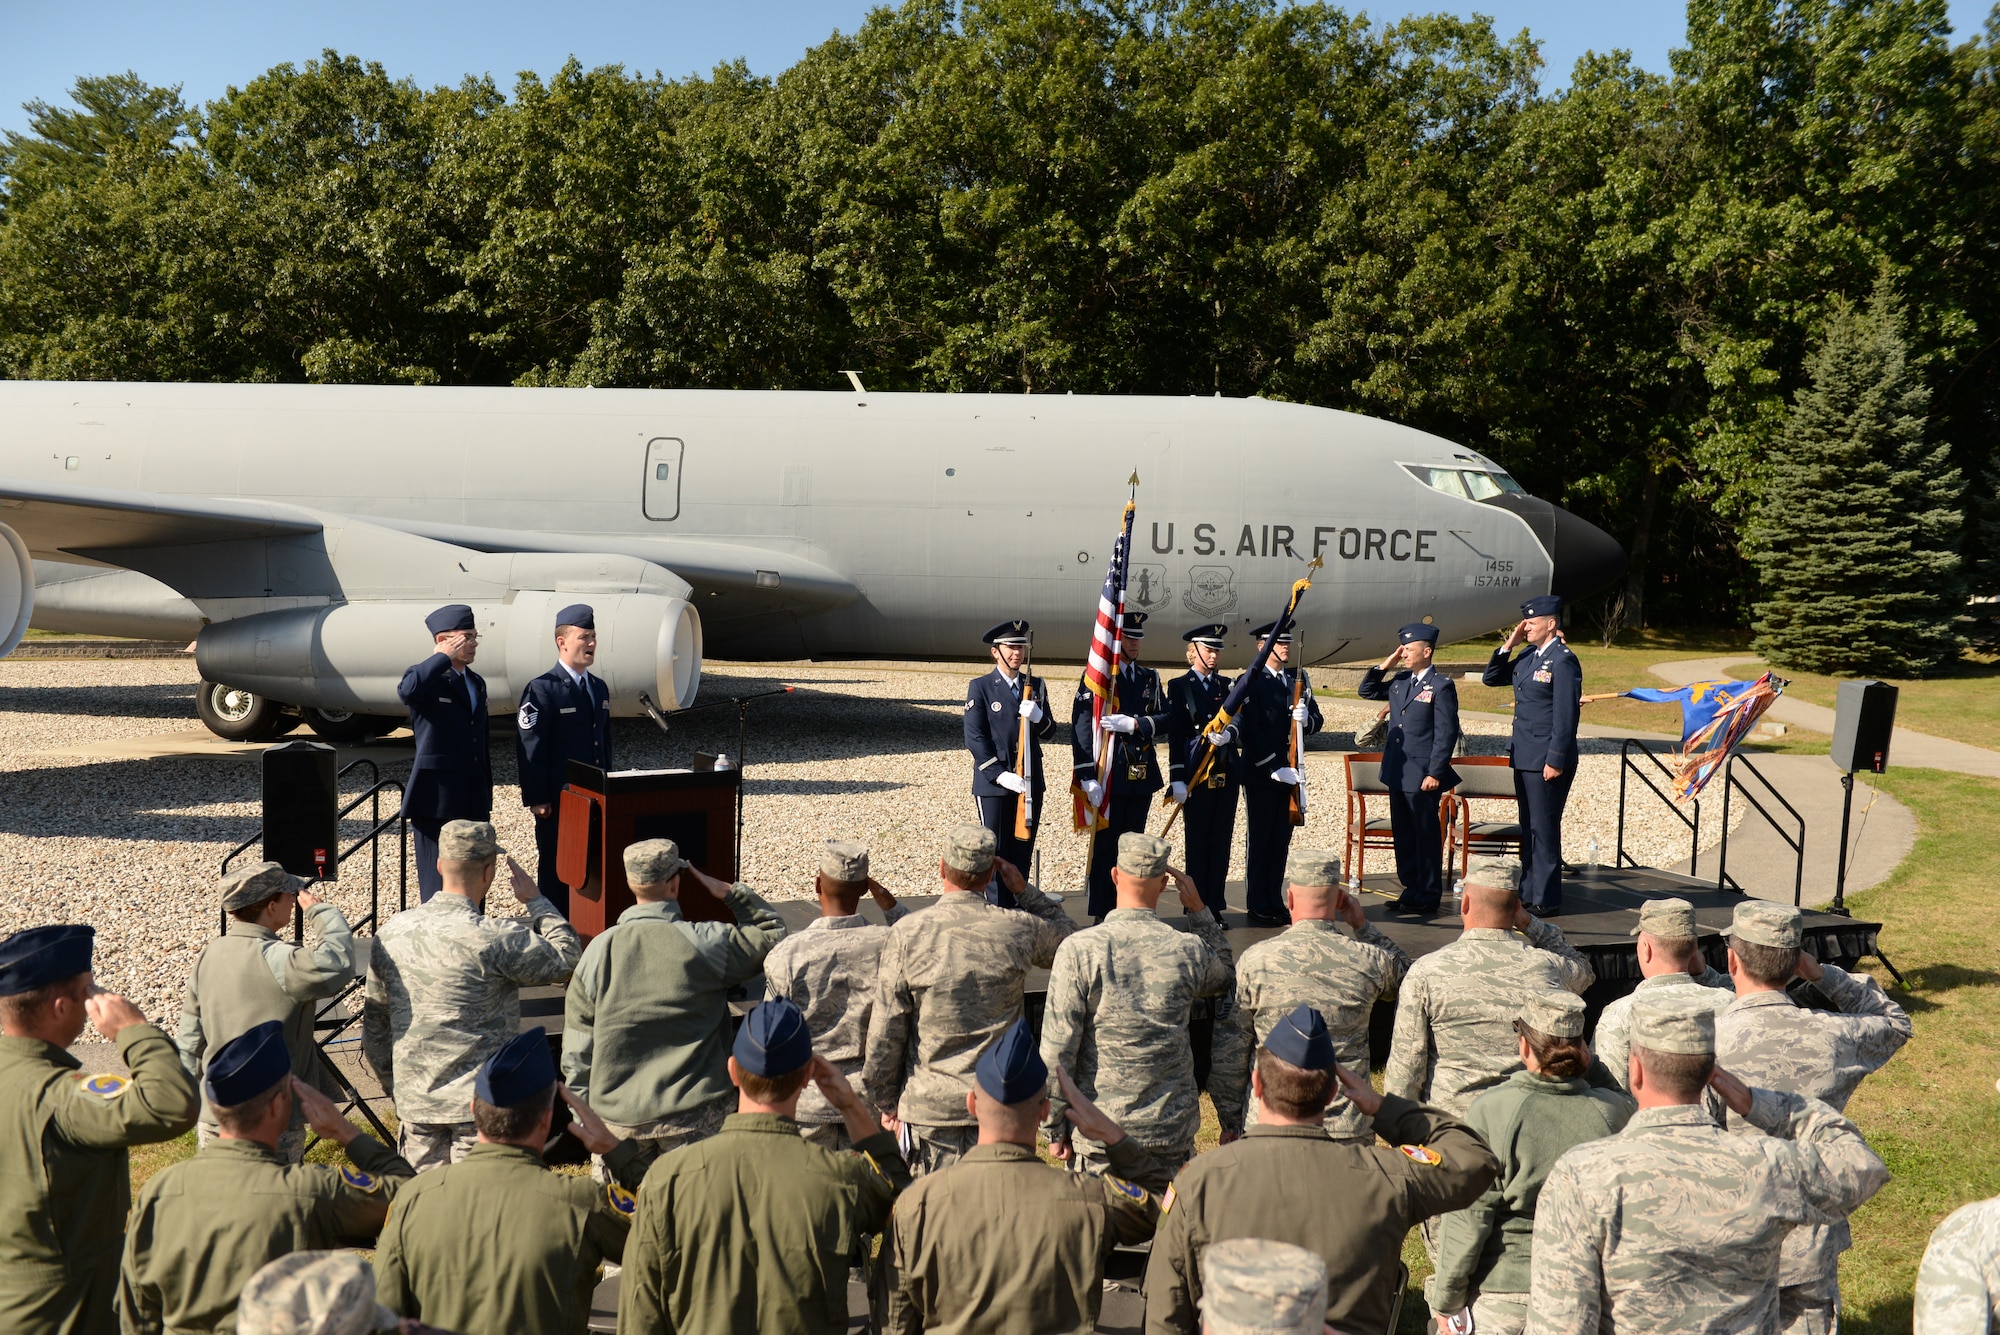 Col. Robert Hanovich Jr, commander of the 22nd Operations Group at McConnell Air Force Base, and Lt. Col. Kevin Eley render a salute as the National Anthem is sang by Master Sgt. William Cole, analyst, 157th Operations Group, during an assumption of command ceremony for Eley, who assumed command of the 64th ARS during a ceremony, Sept. 24, at Pease Air National Guard Base. (Photo by Master Sgt. Thomas Johnson, 157th ARW Public Affairs)